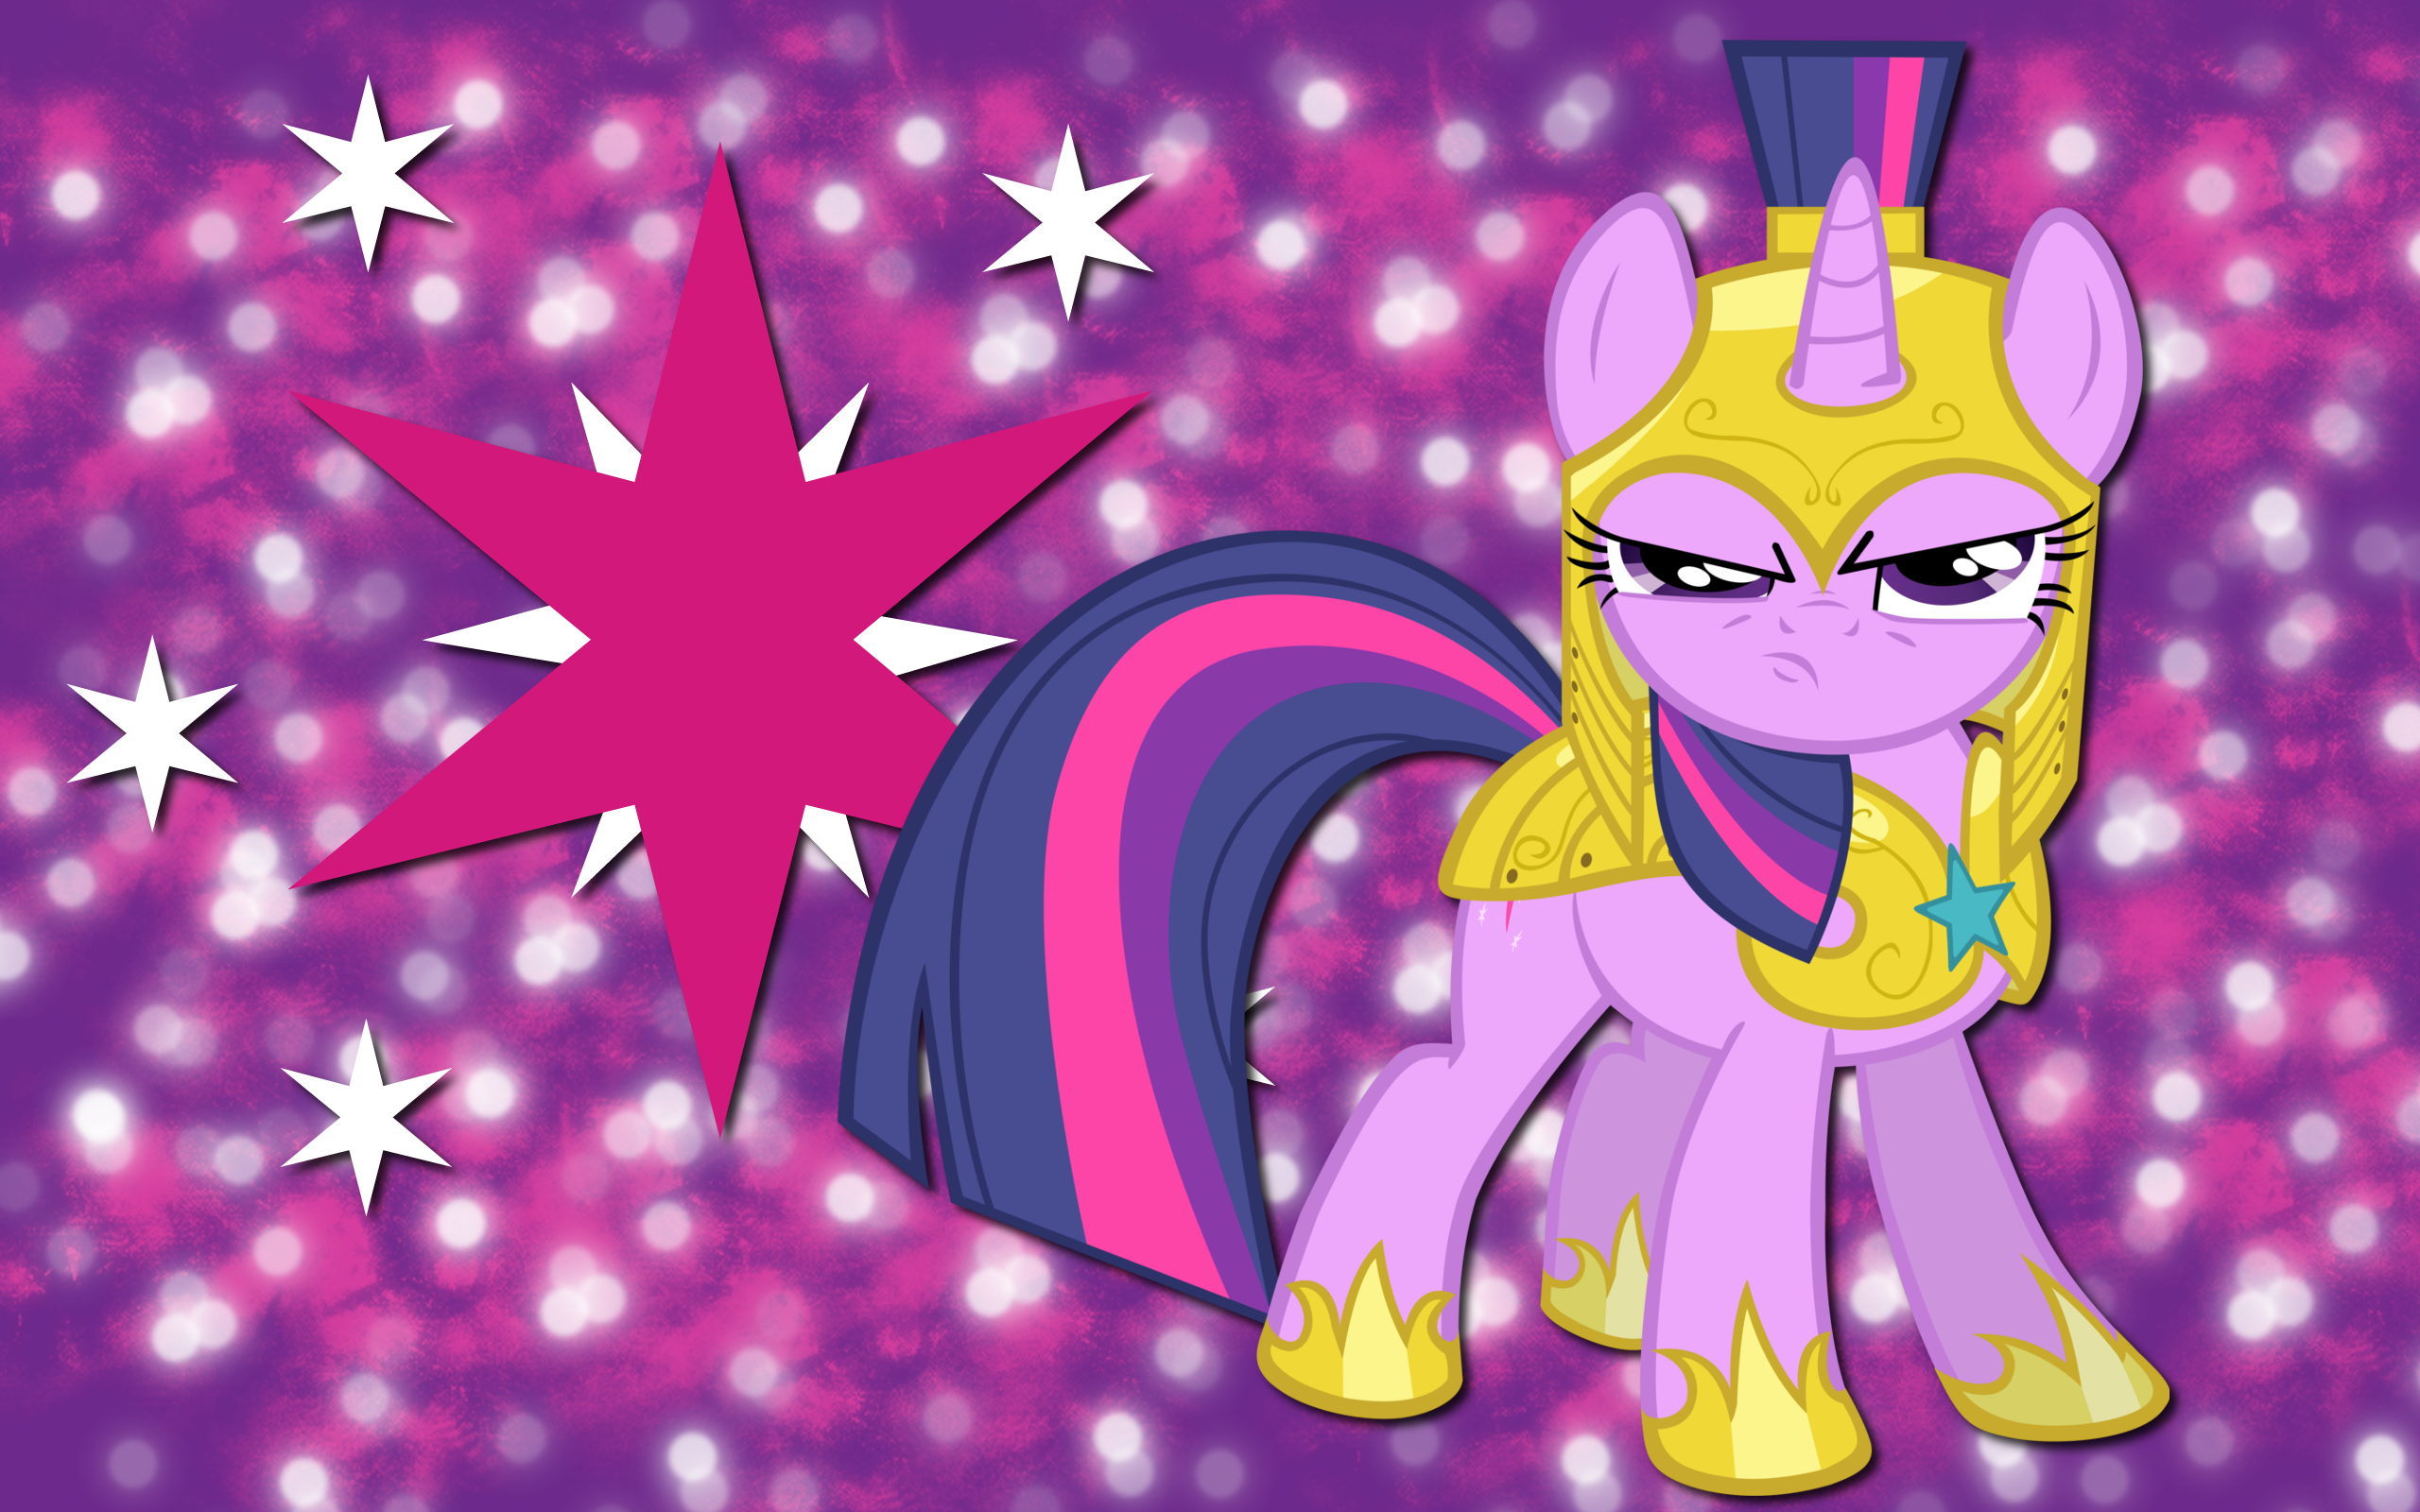 Guard Twilight WP by AliceHumanSacrifice0, ooklah and Spaceponies